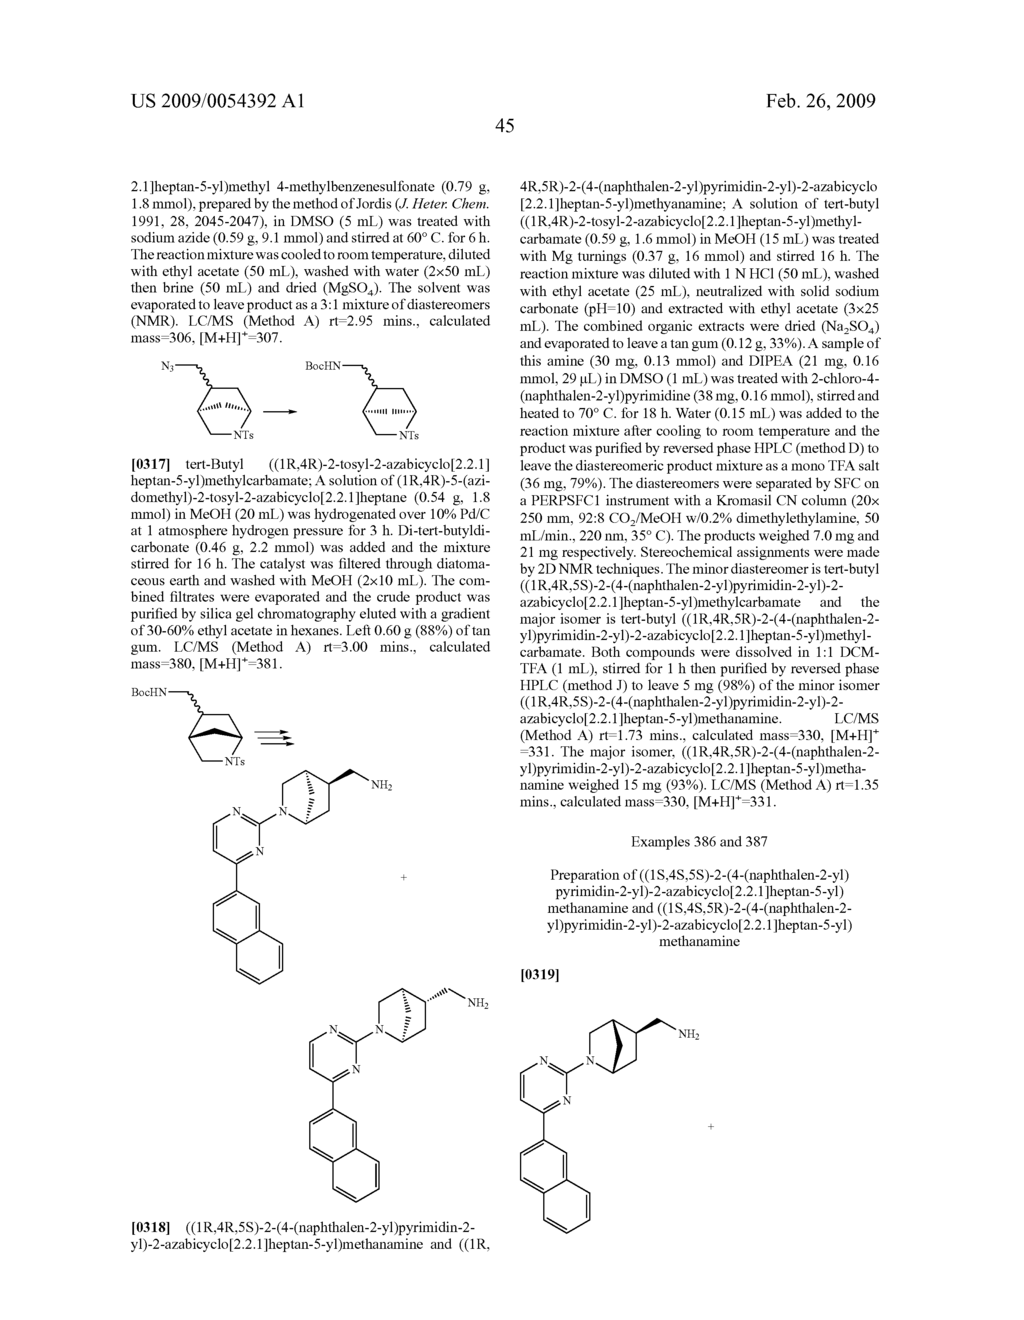 NAPHTHYLPYRIMIDINE, NAPHTHYLPYRAZINE AND NAPHTHYLPYRIDAZINE ANALOGS AND THEIR USE AS AGONISTS OF THE WNT-BETA-CATENIN CELLULAR MESSAGING SYSTEM - diagram, schematic, and image 46